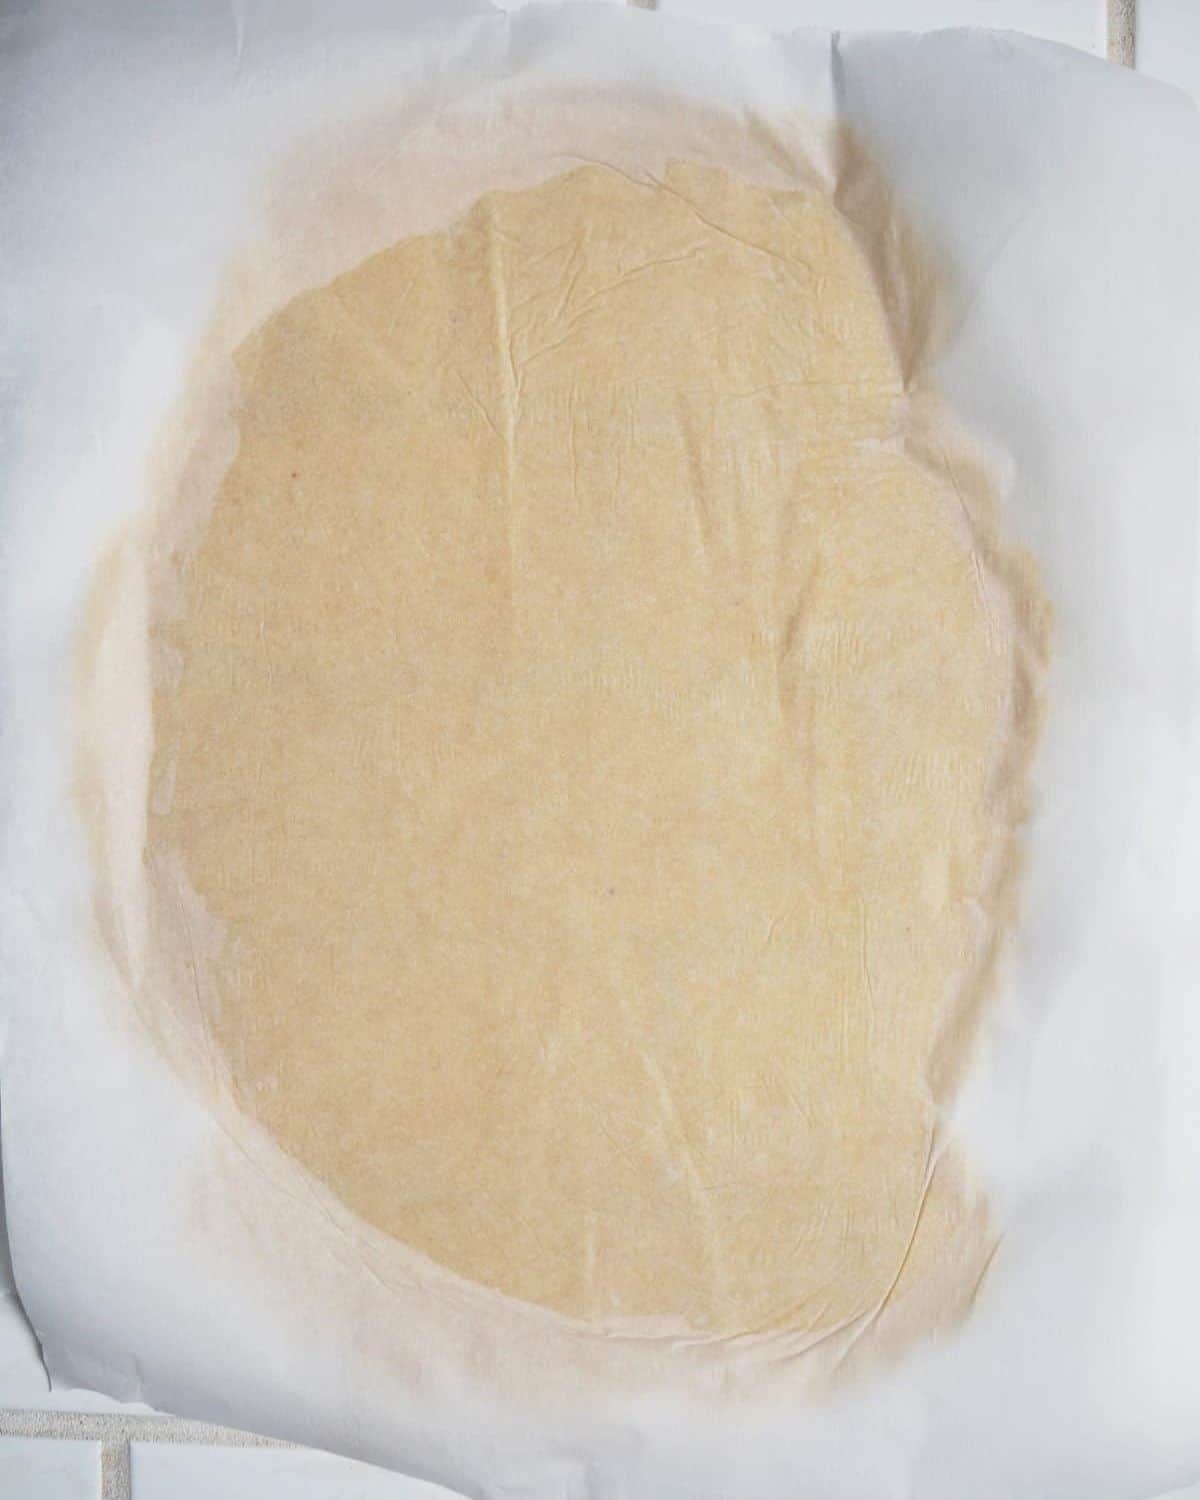 The wonton dough rolled out into a large oval between two pieces of parchment paper.